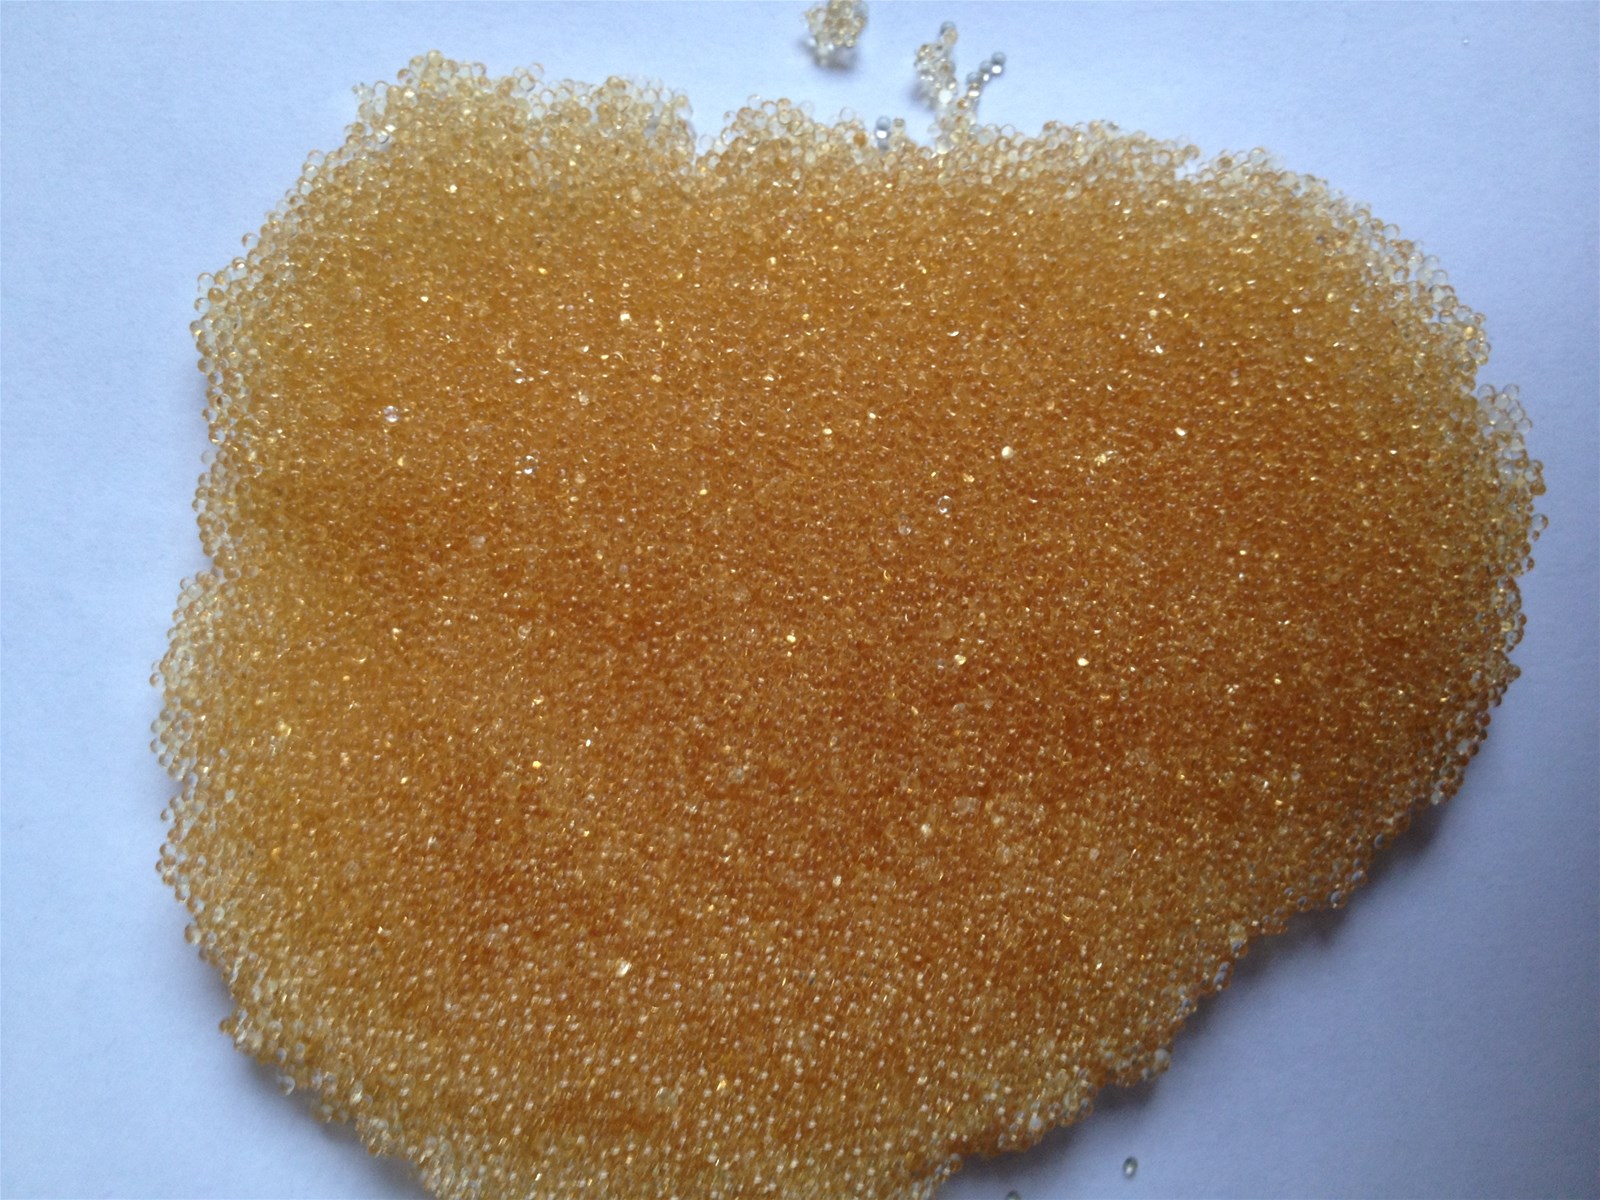 Special resin for extraction tungsten